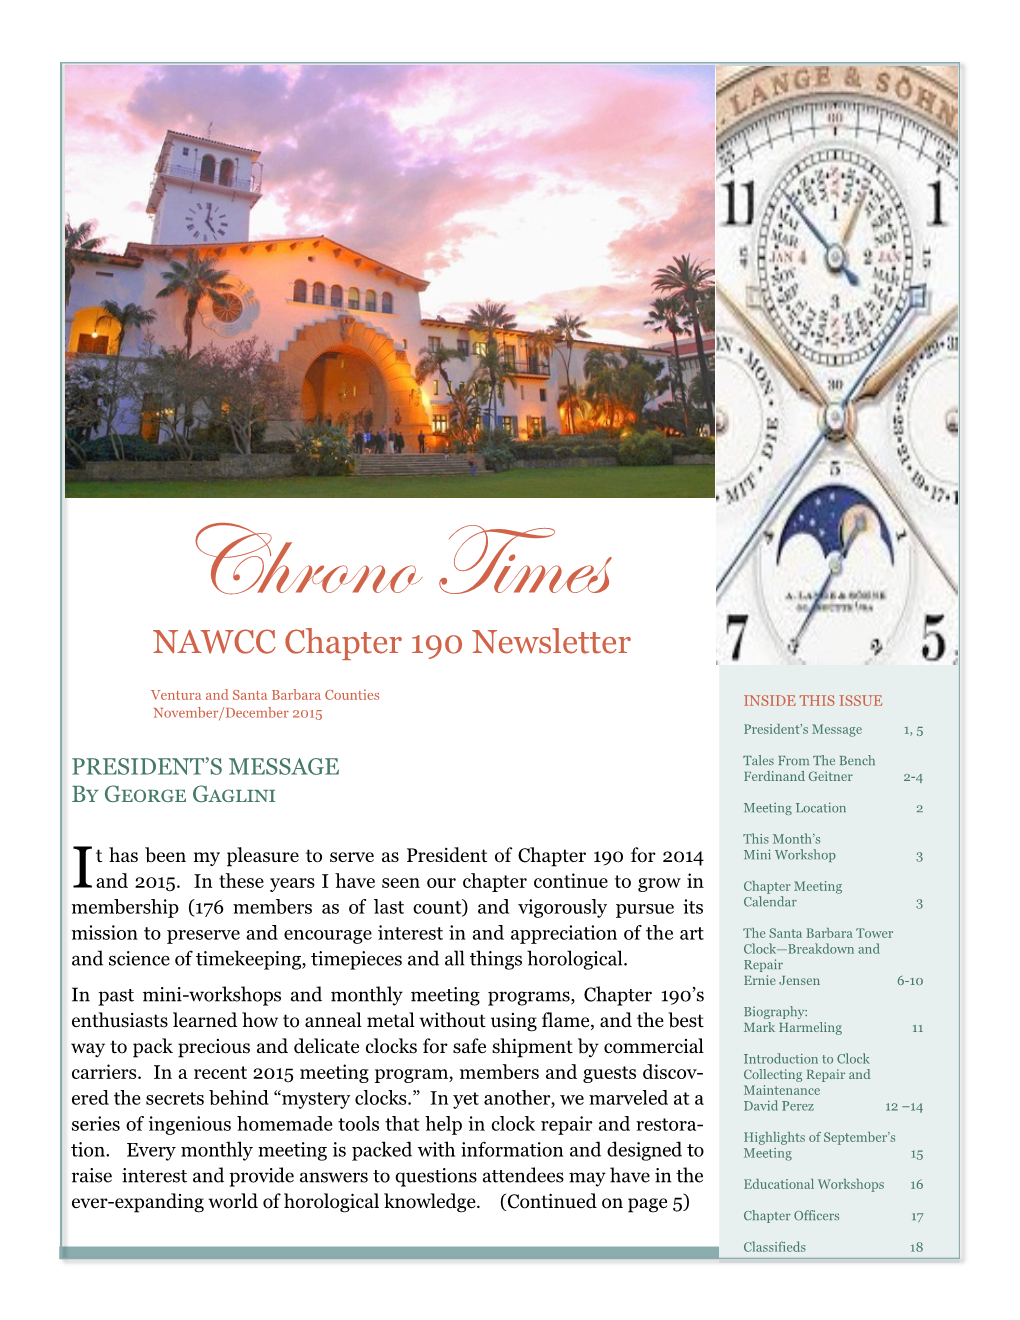 Chrono Times NAWCC Chapter 190 Newsletter